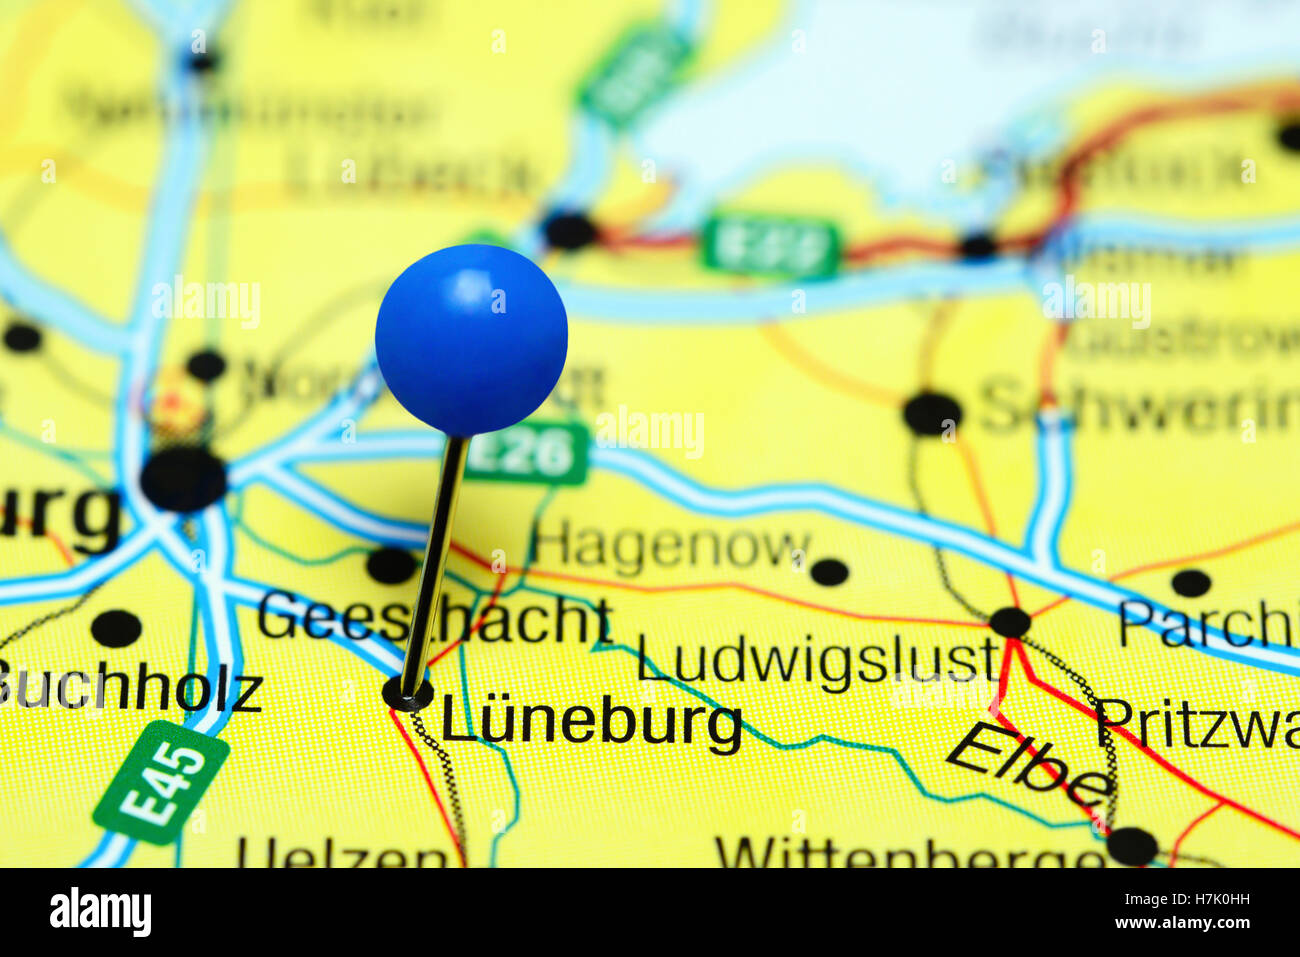 Luneburg pinned on a map of Germany Stock Photo